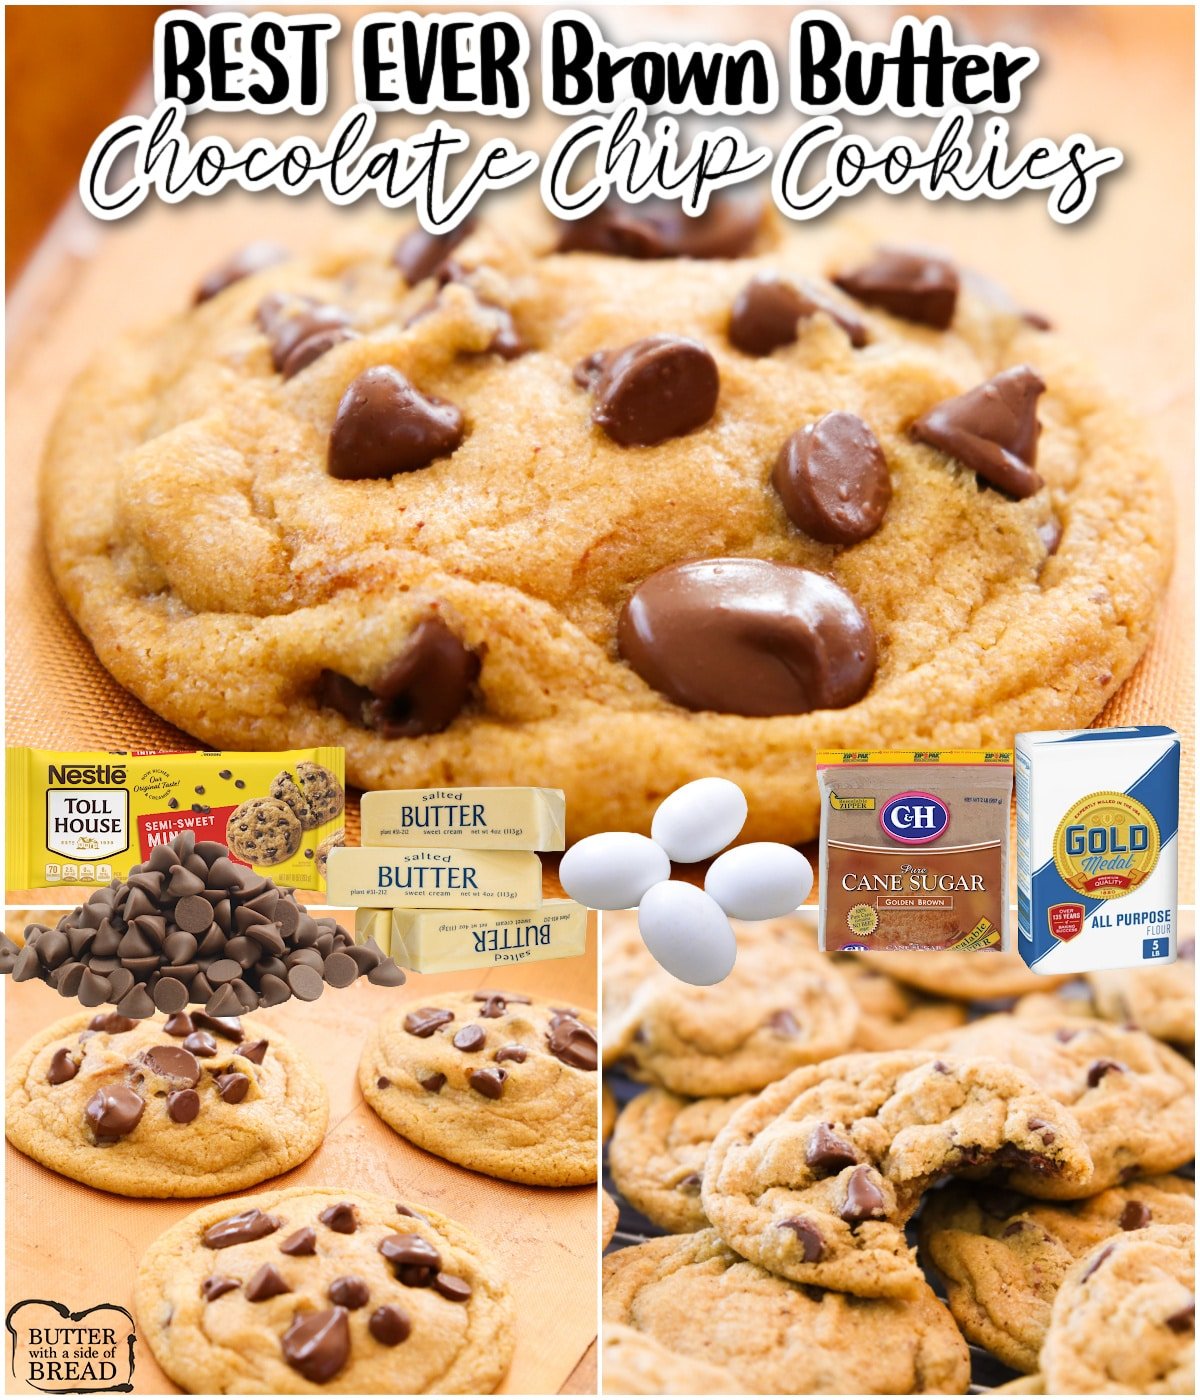 Best Brown Butter Chocolate Chip Cookies are a classic cookie with an incredibly delicious twist! The brown butter adds an amazing caramel-like flavor that everyone loves!